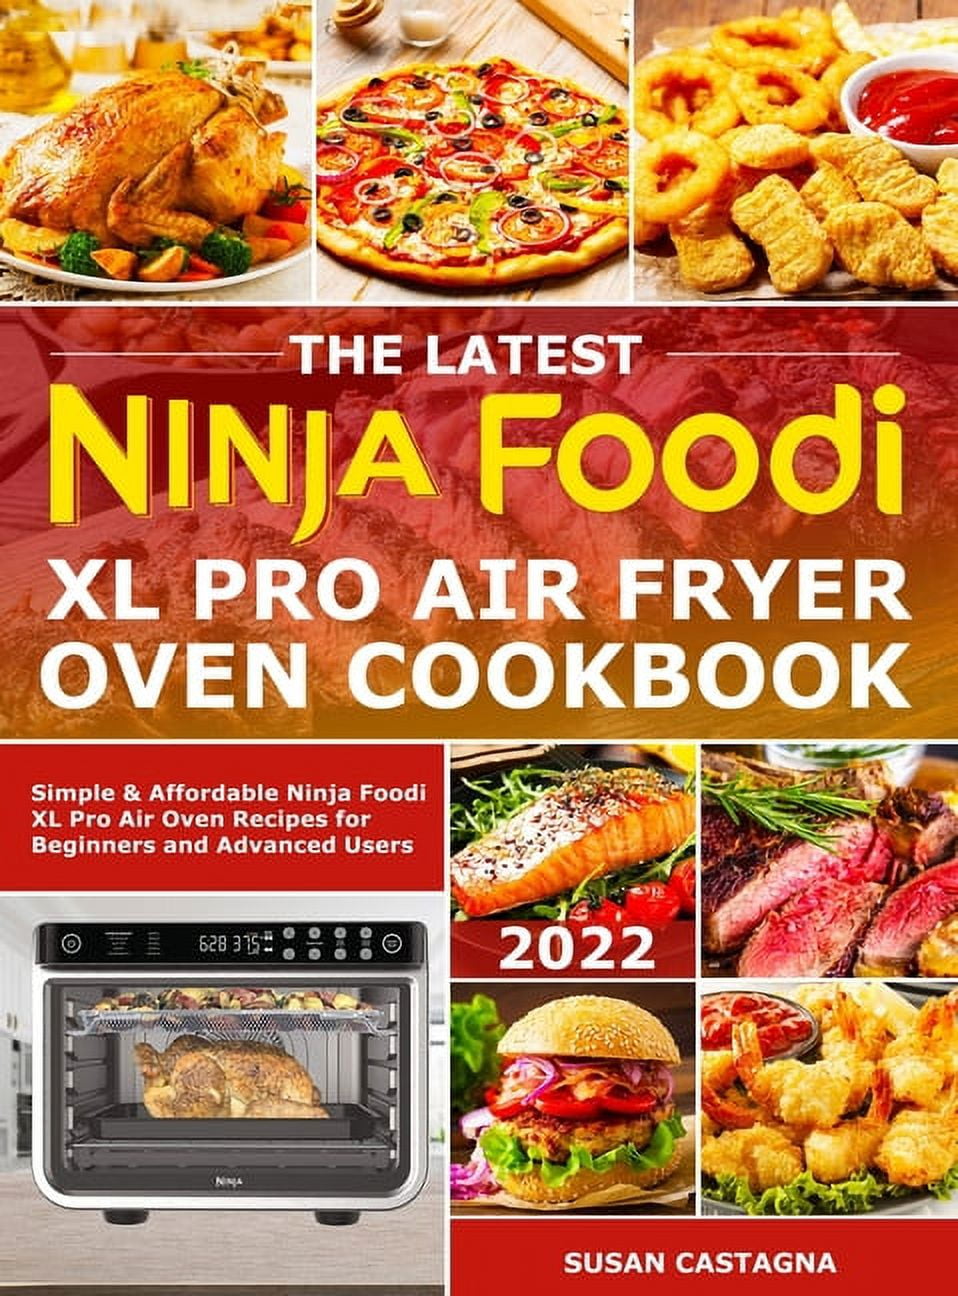 Ninja Foodi XL Pro Air Oven Complete Cookbook: 1500 Easy & Tasty Ninja  Foodi XL Pro Air Fryer Oven Recipes for Beginners to Air Fry, Air Roast,  Bake